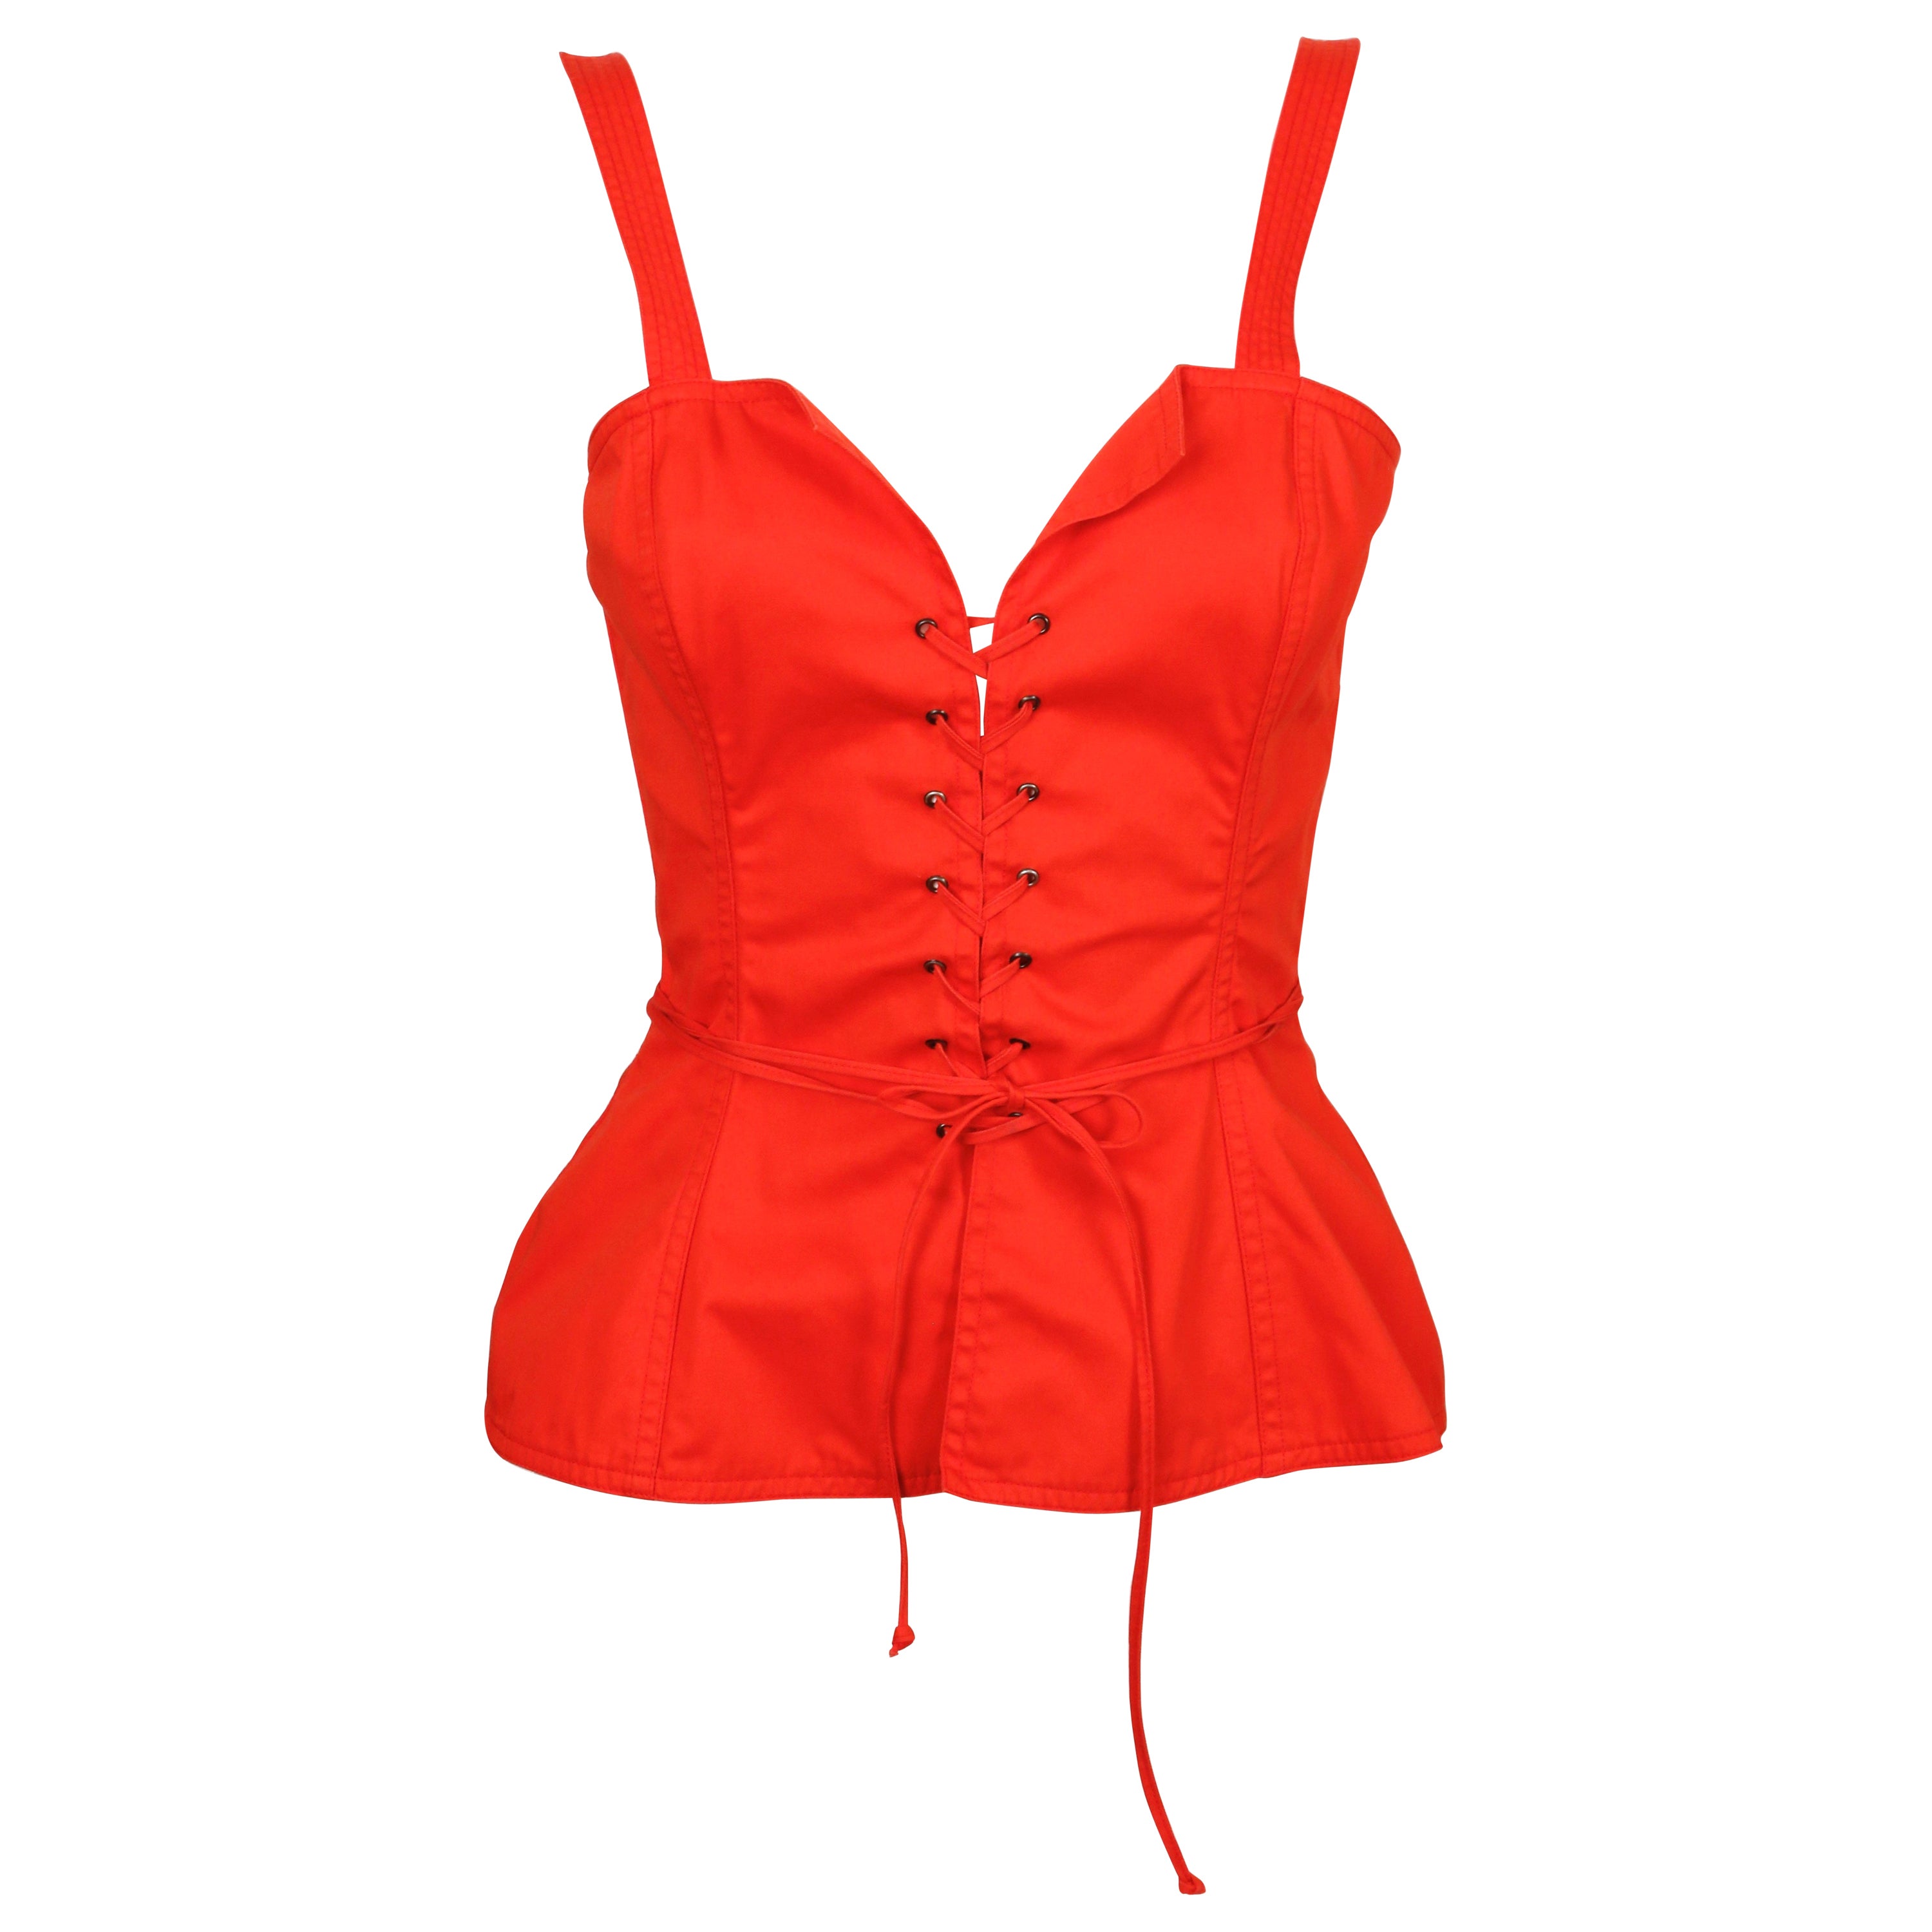 1977 YVES SAINT LAURENT red lace up RUNWAy peasant bustier  